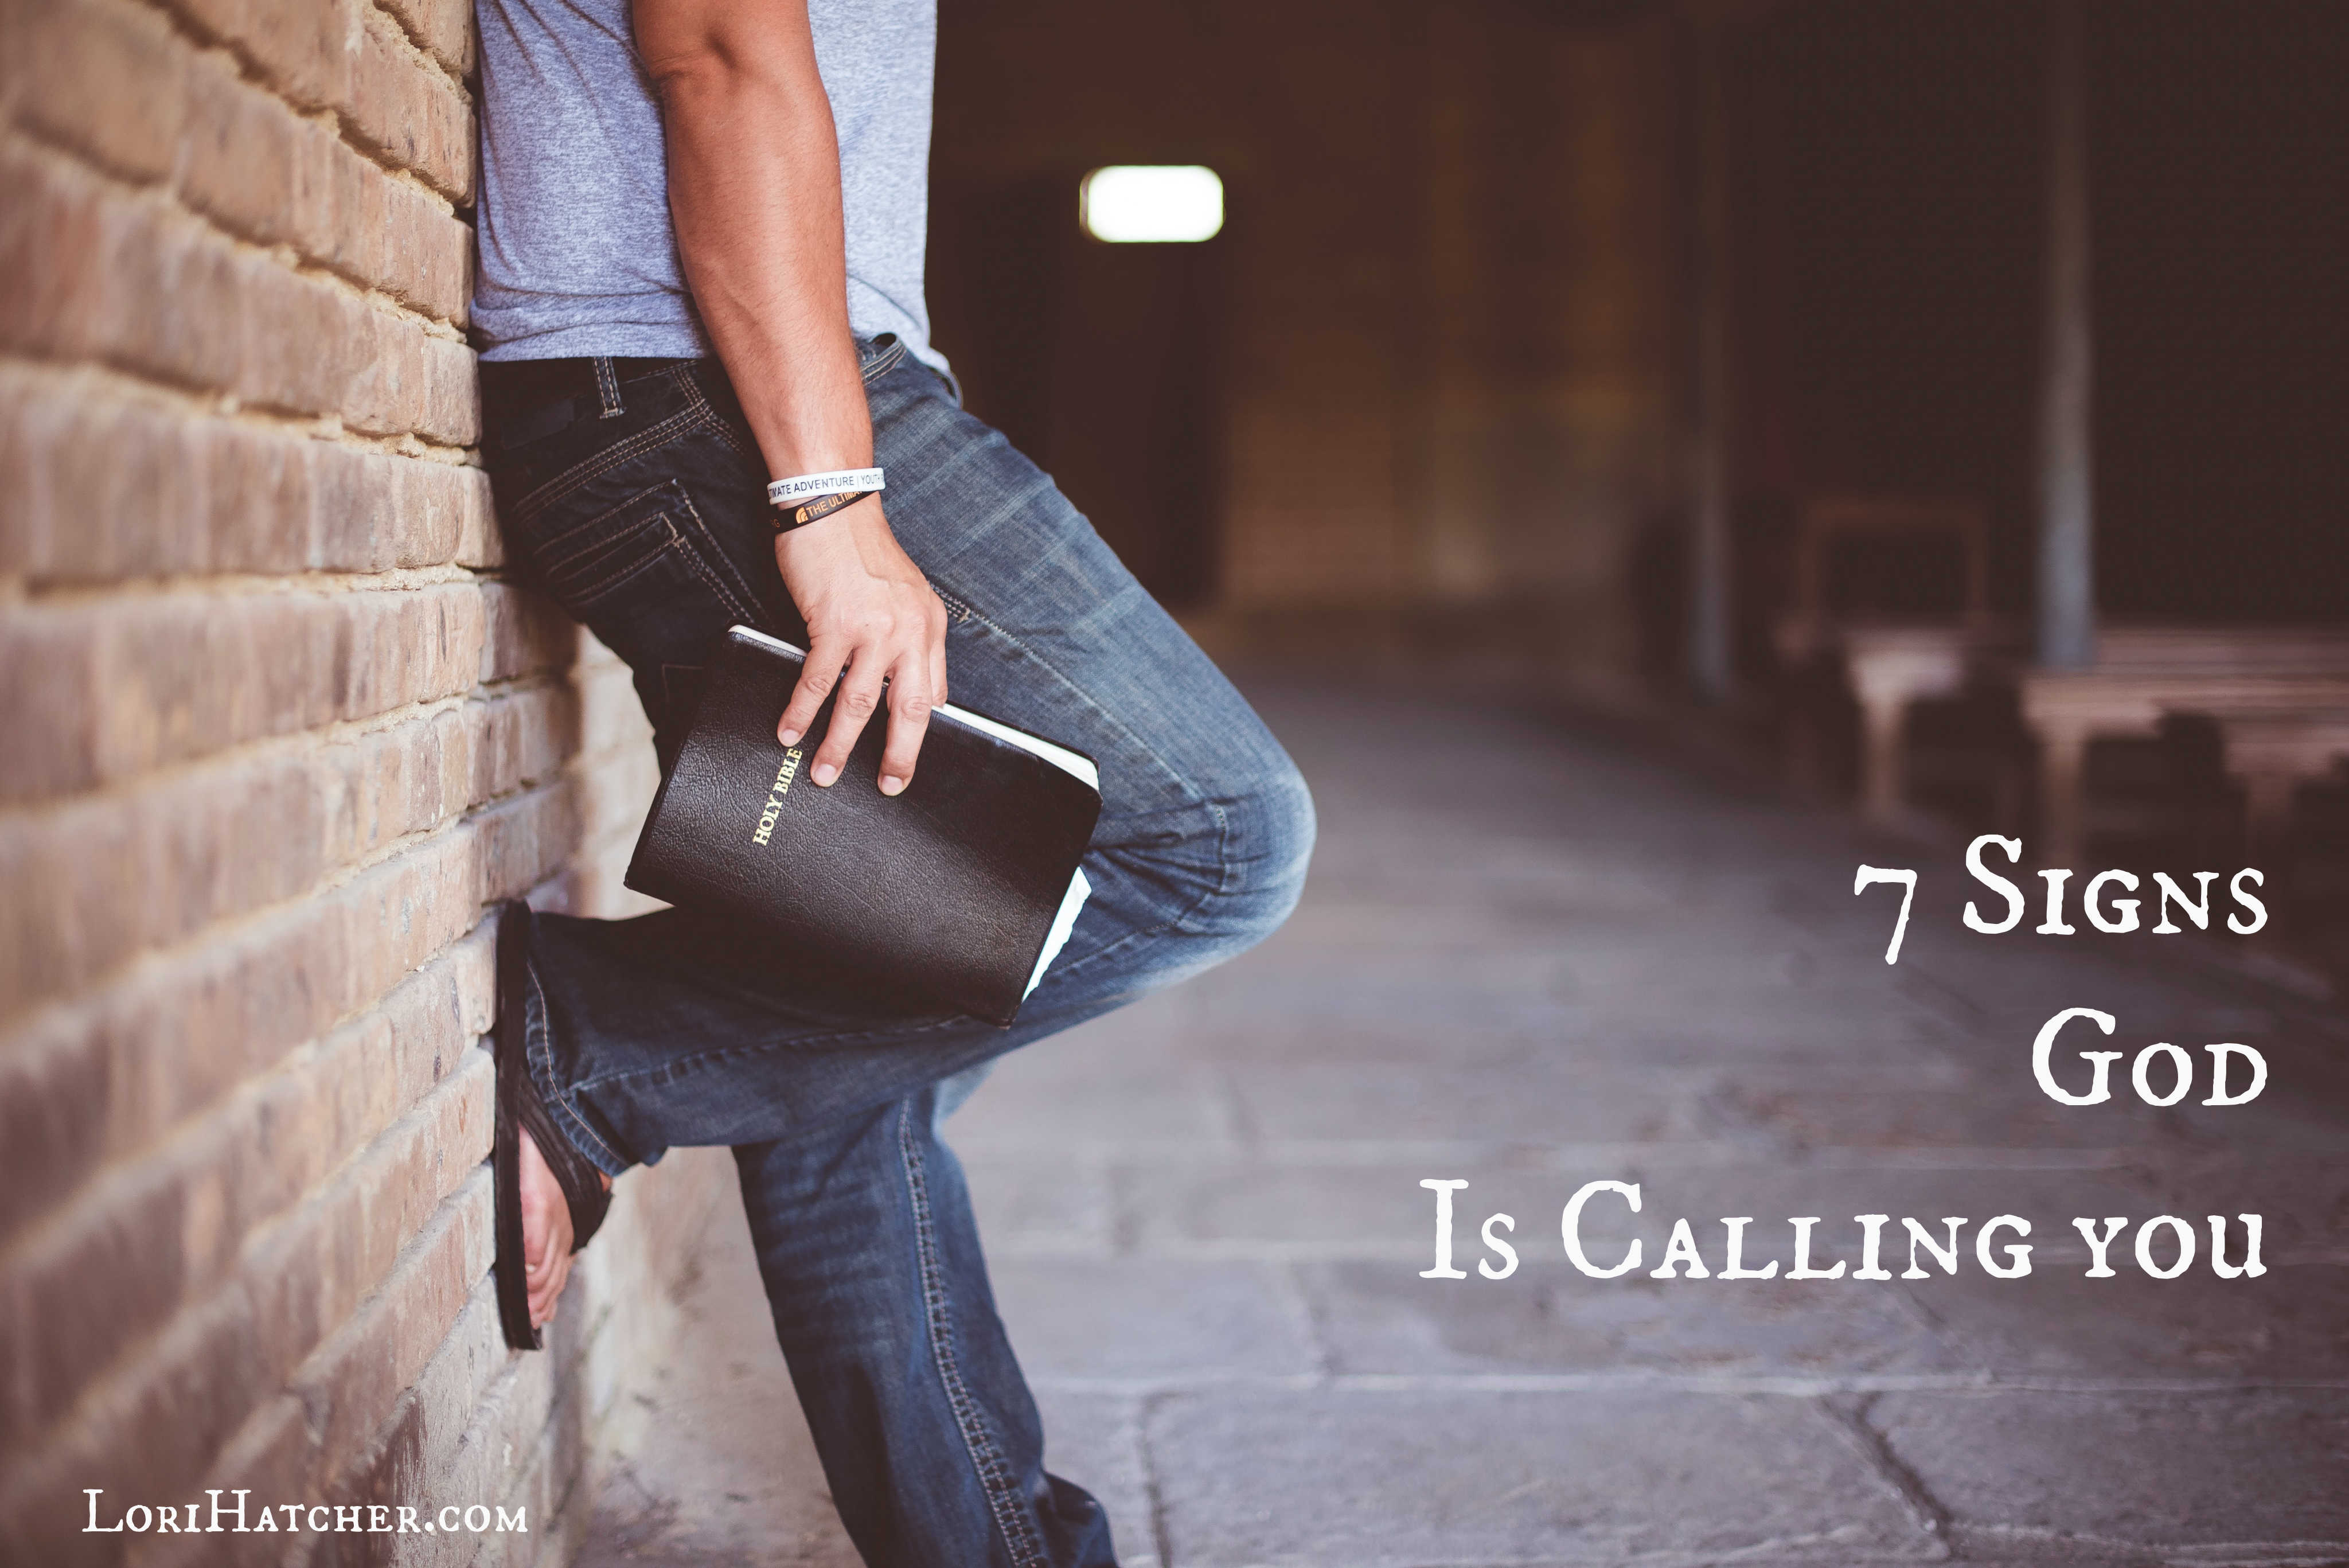 7 Signs God is Calling You